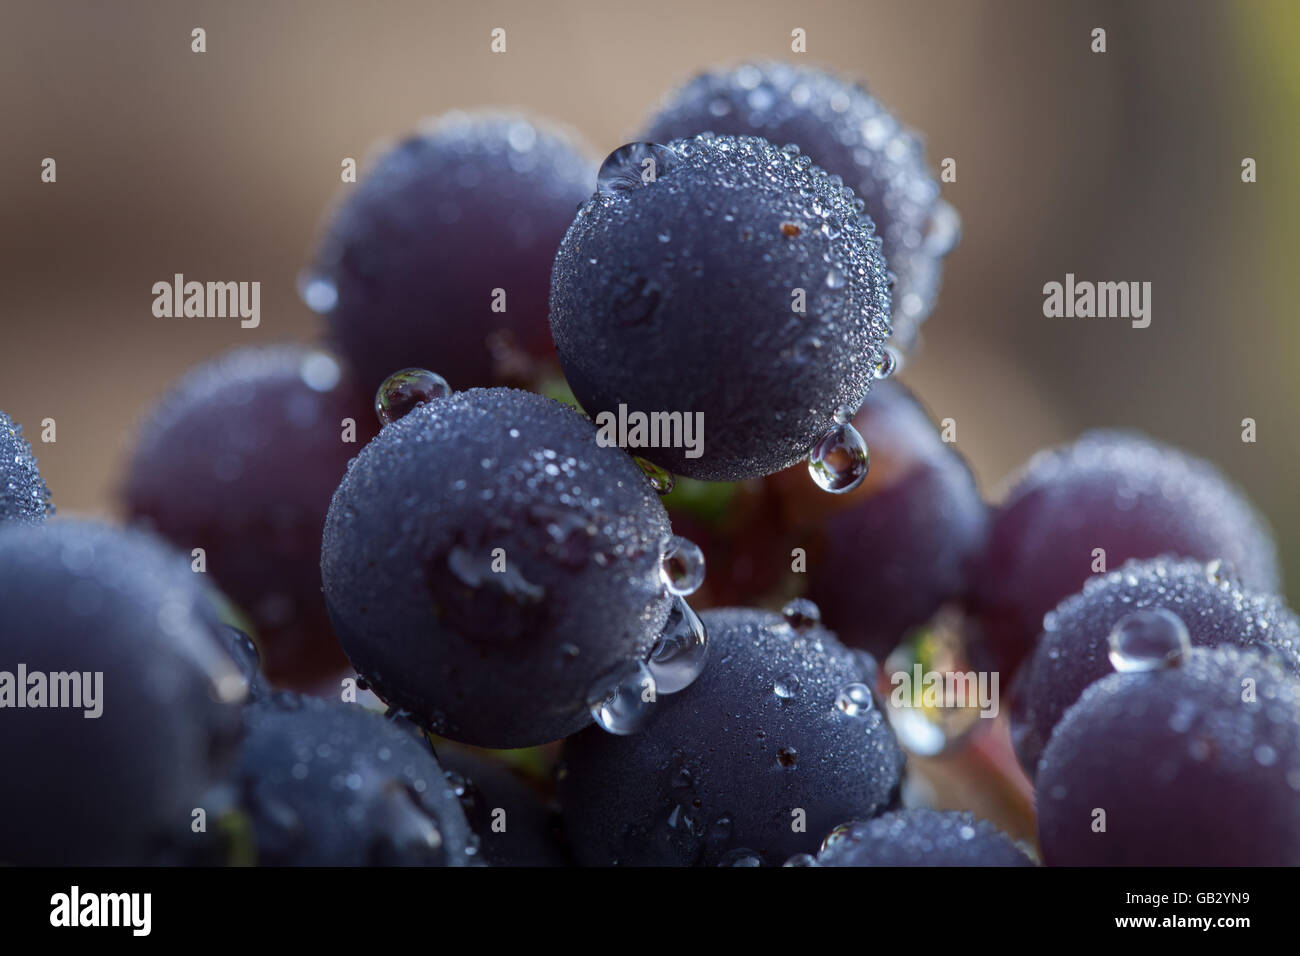 Bunch of Grapes, with water droplets from Sweden Stock Photo